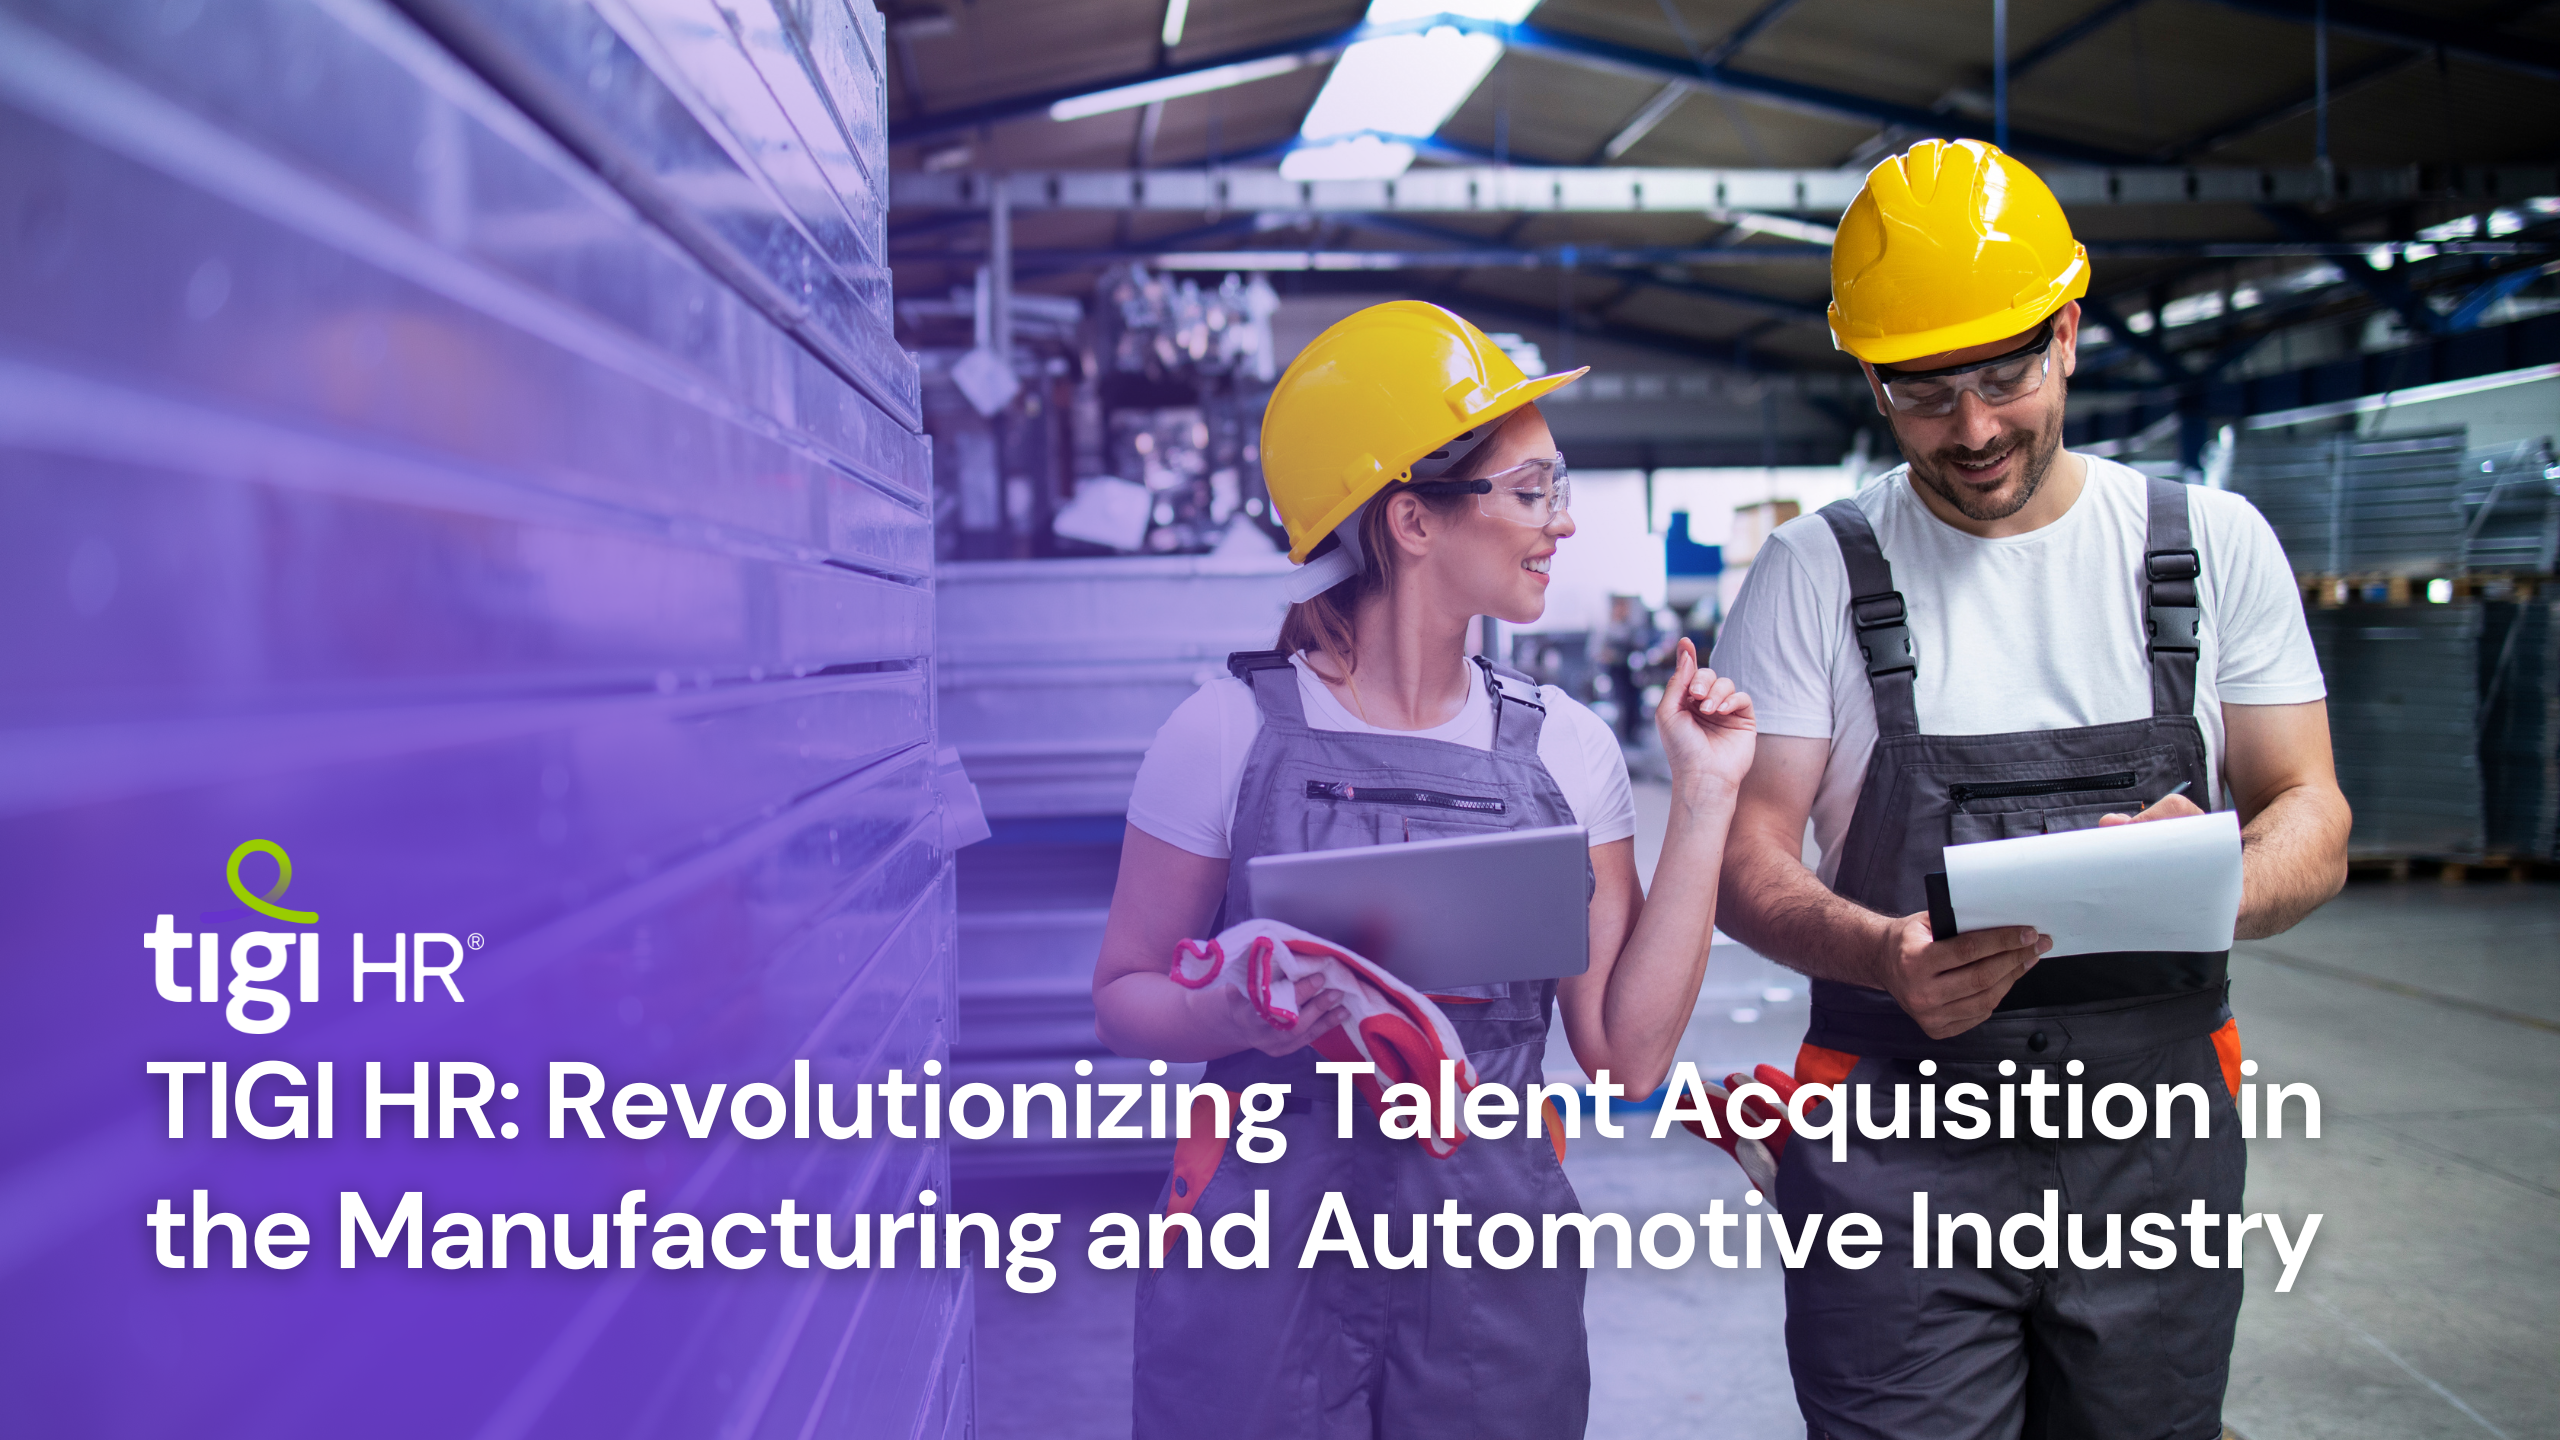 TIGI HR Revolutionizing Talent Acquisition in the Manufacturing and Automotive Industry